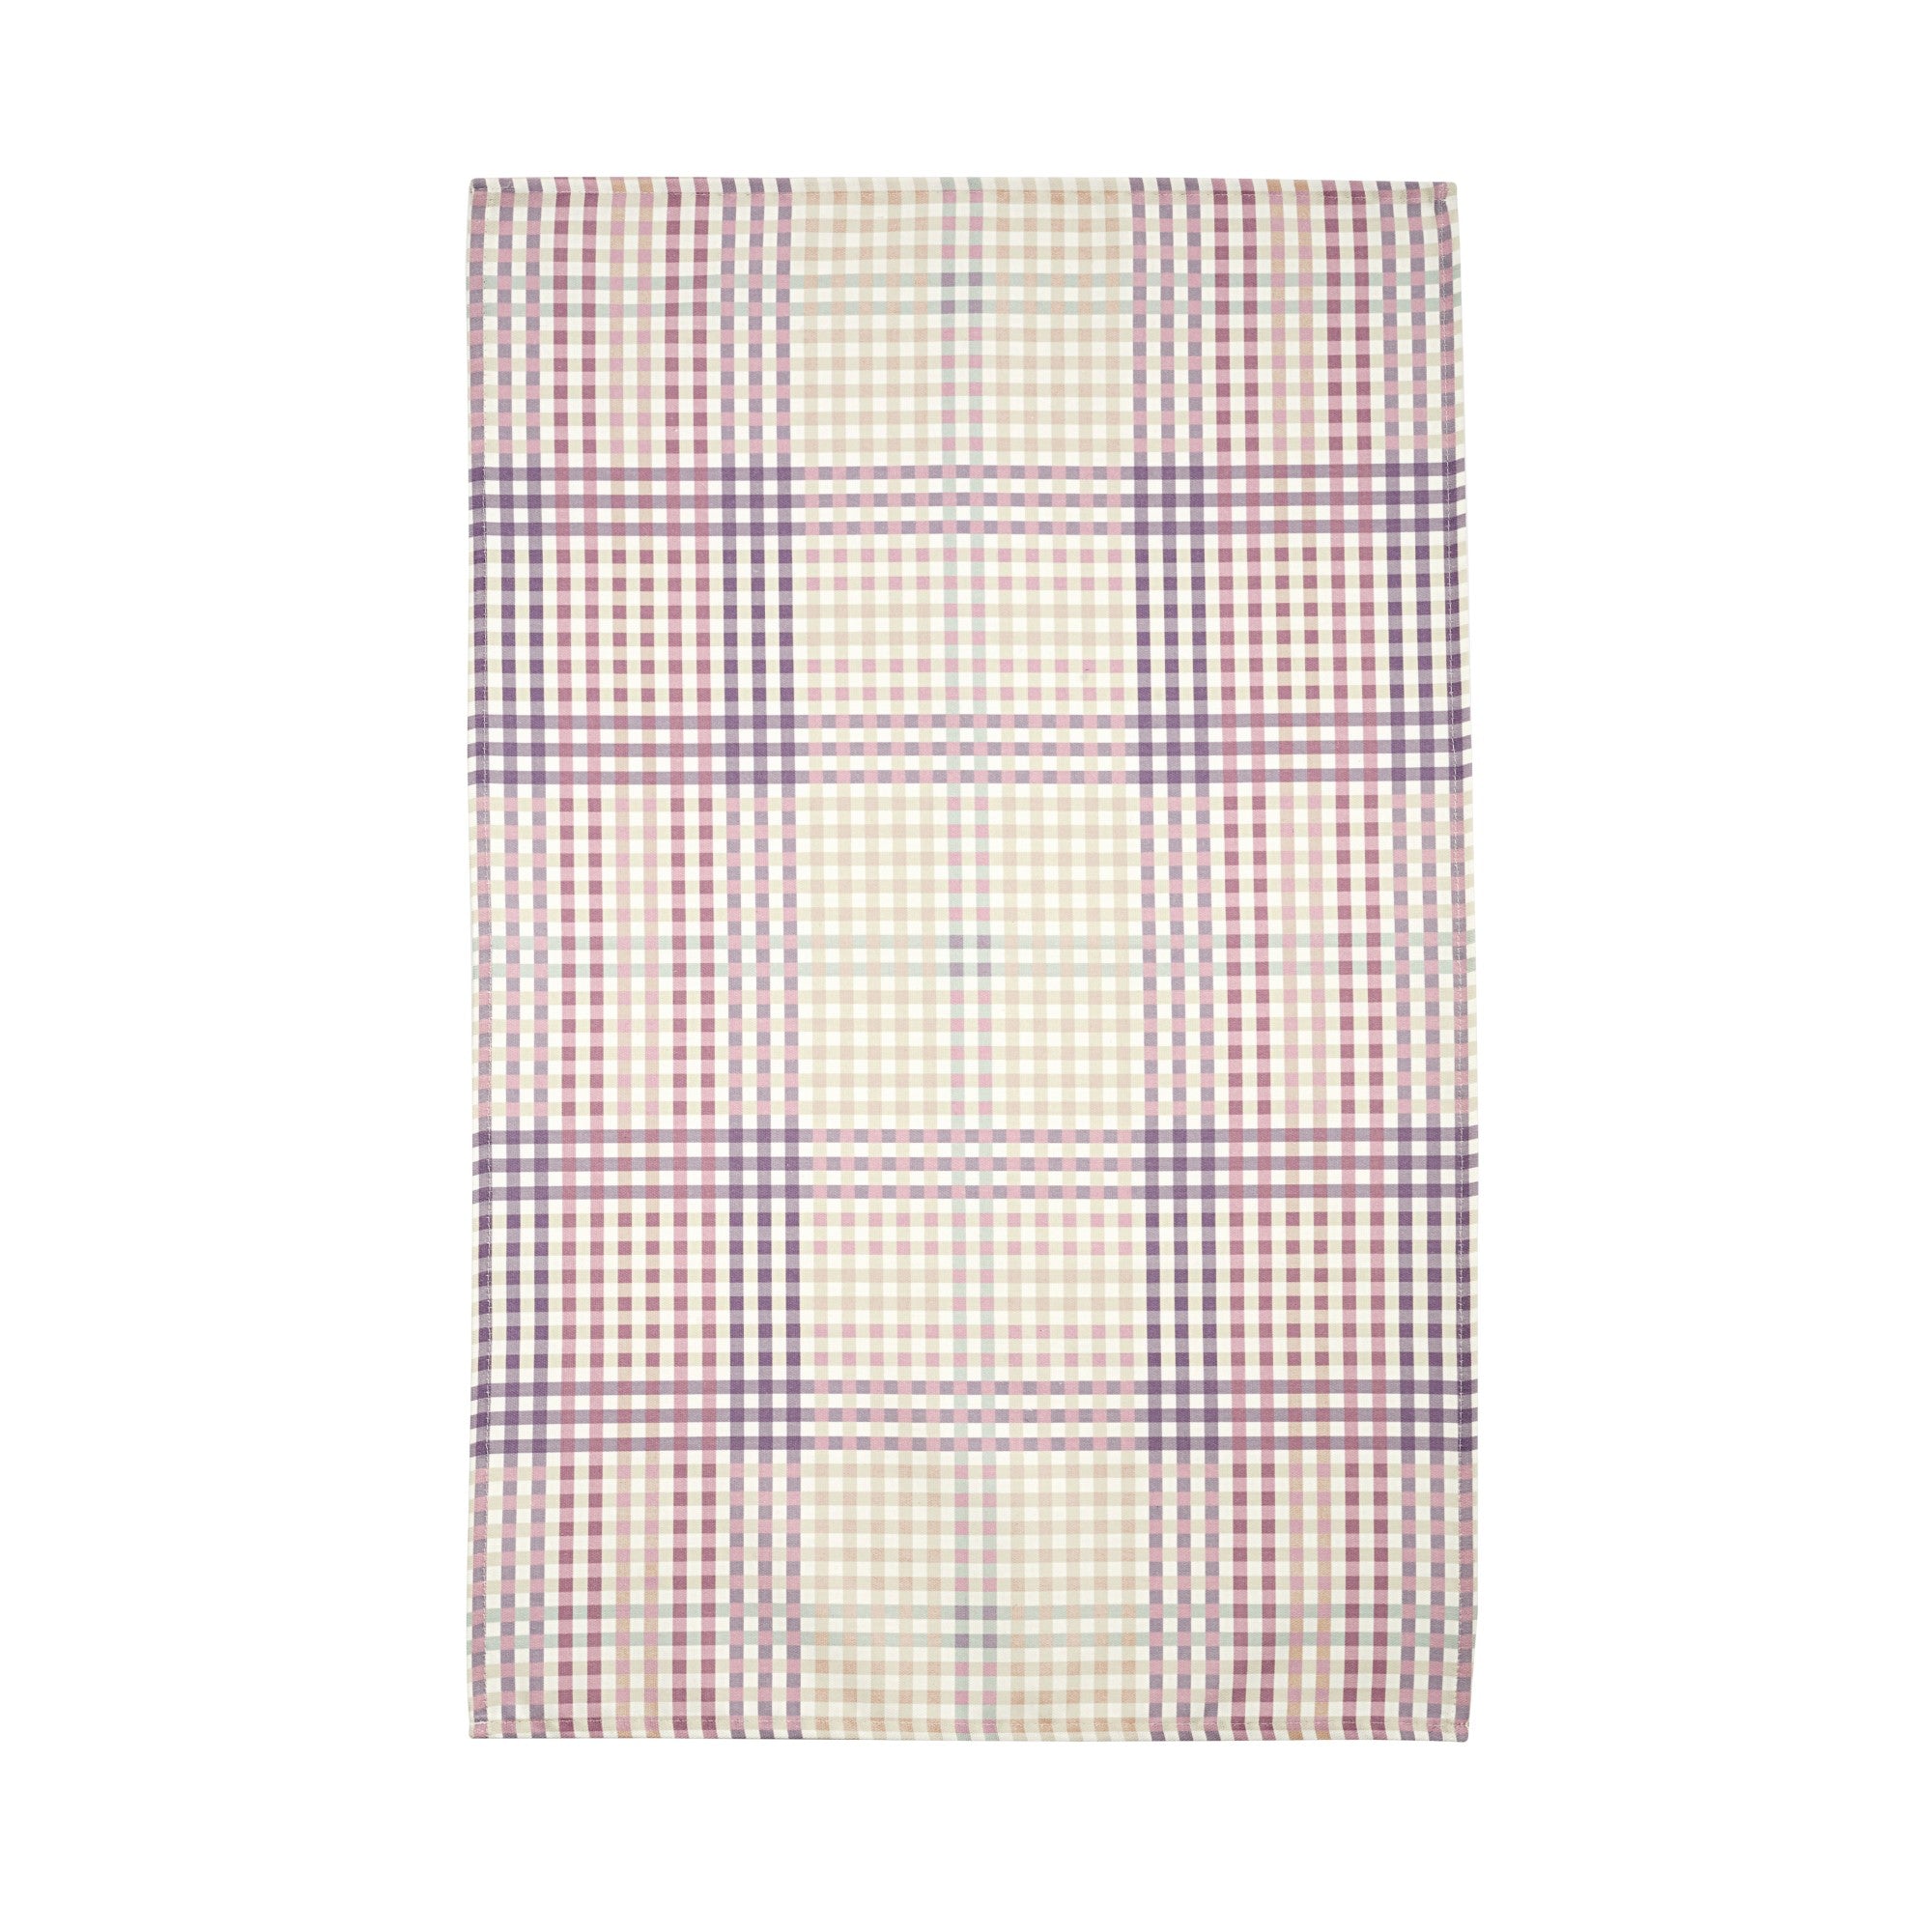 Ulster Weavers Cotton Tea Towel (2 Pack) - Mourne Heather (Recycled Cotton/Polyester Blend, Purple) -  - Ulster Weavers